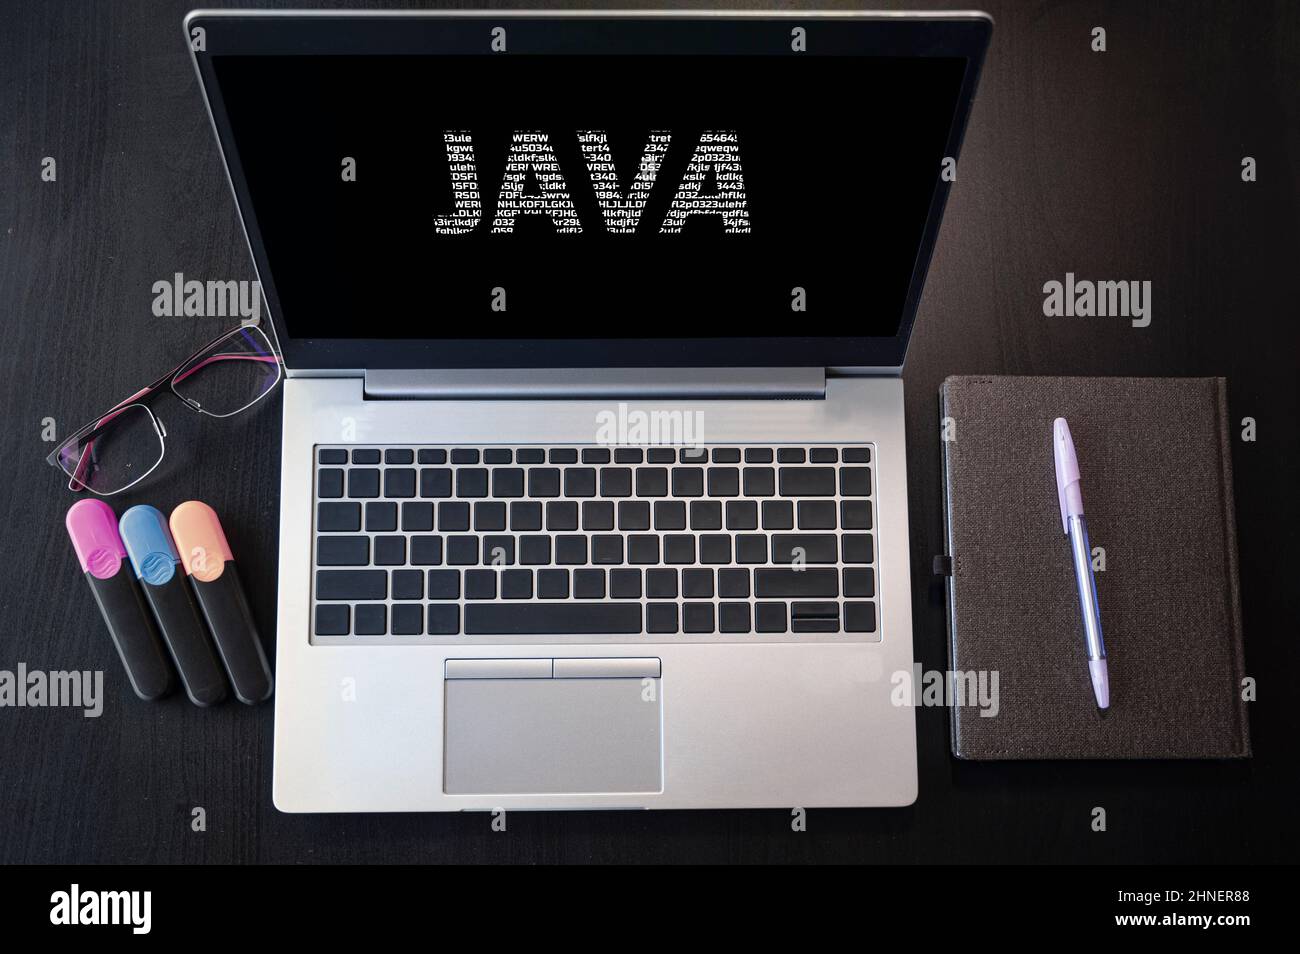 Top view of laptop with text Java. JAVA inscription on laptop screen and keyboard. Learn Java programming language, computer courses, training. Stock Photo